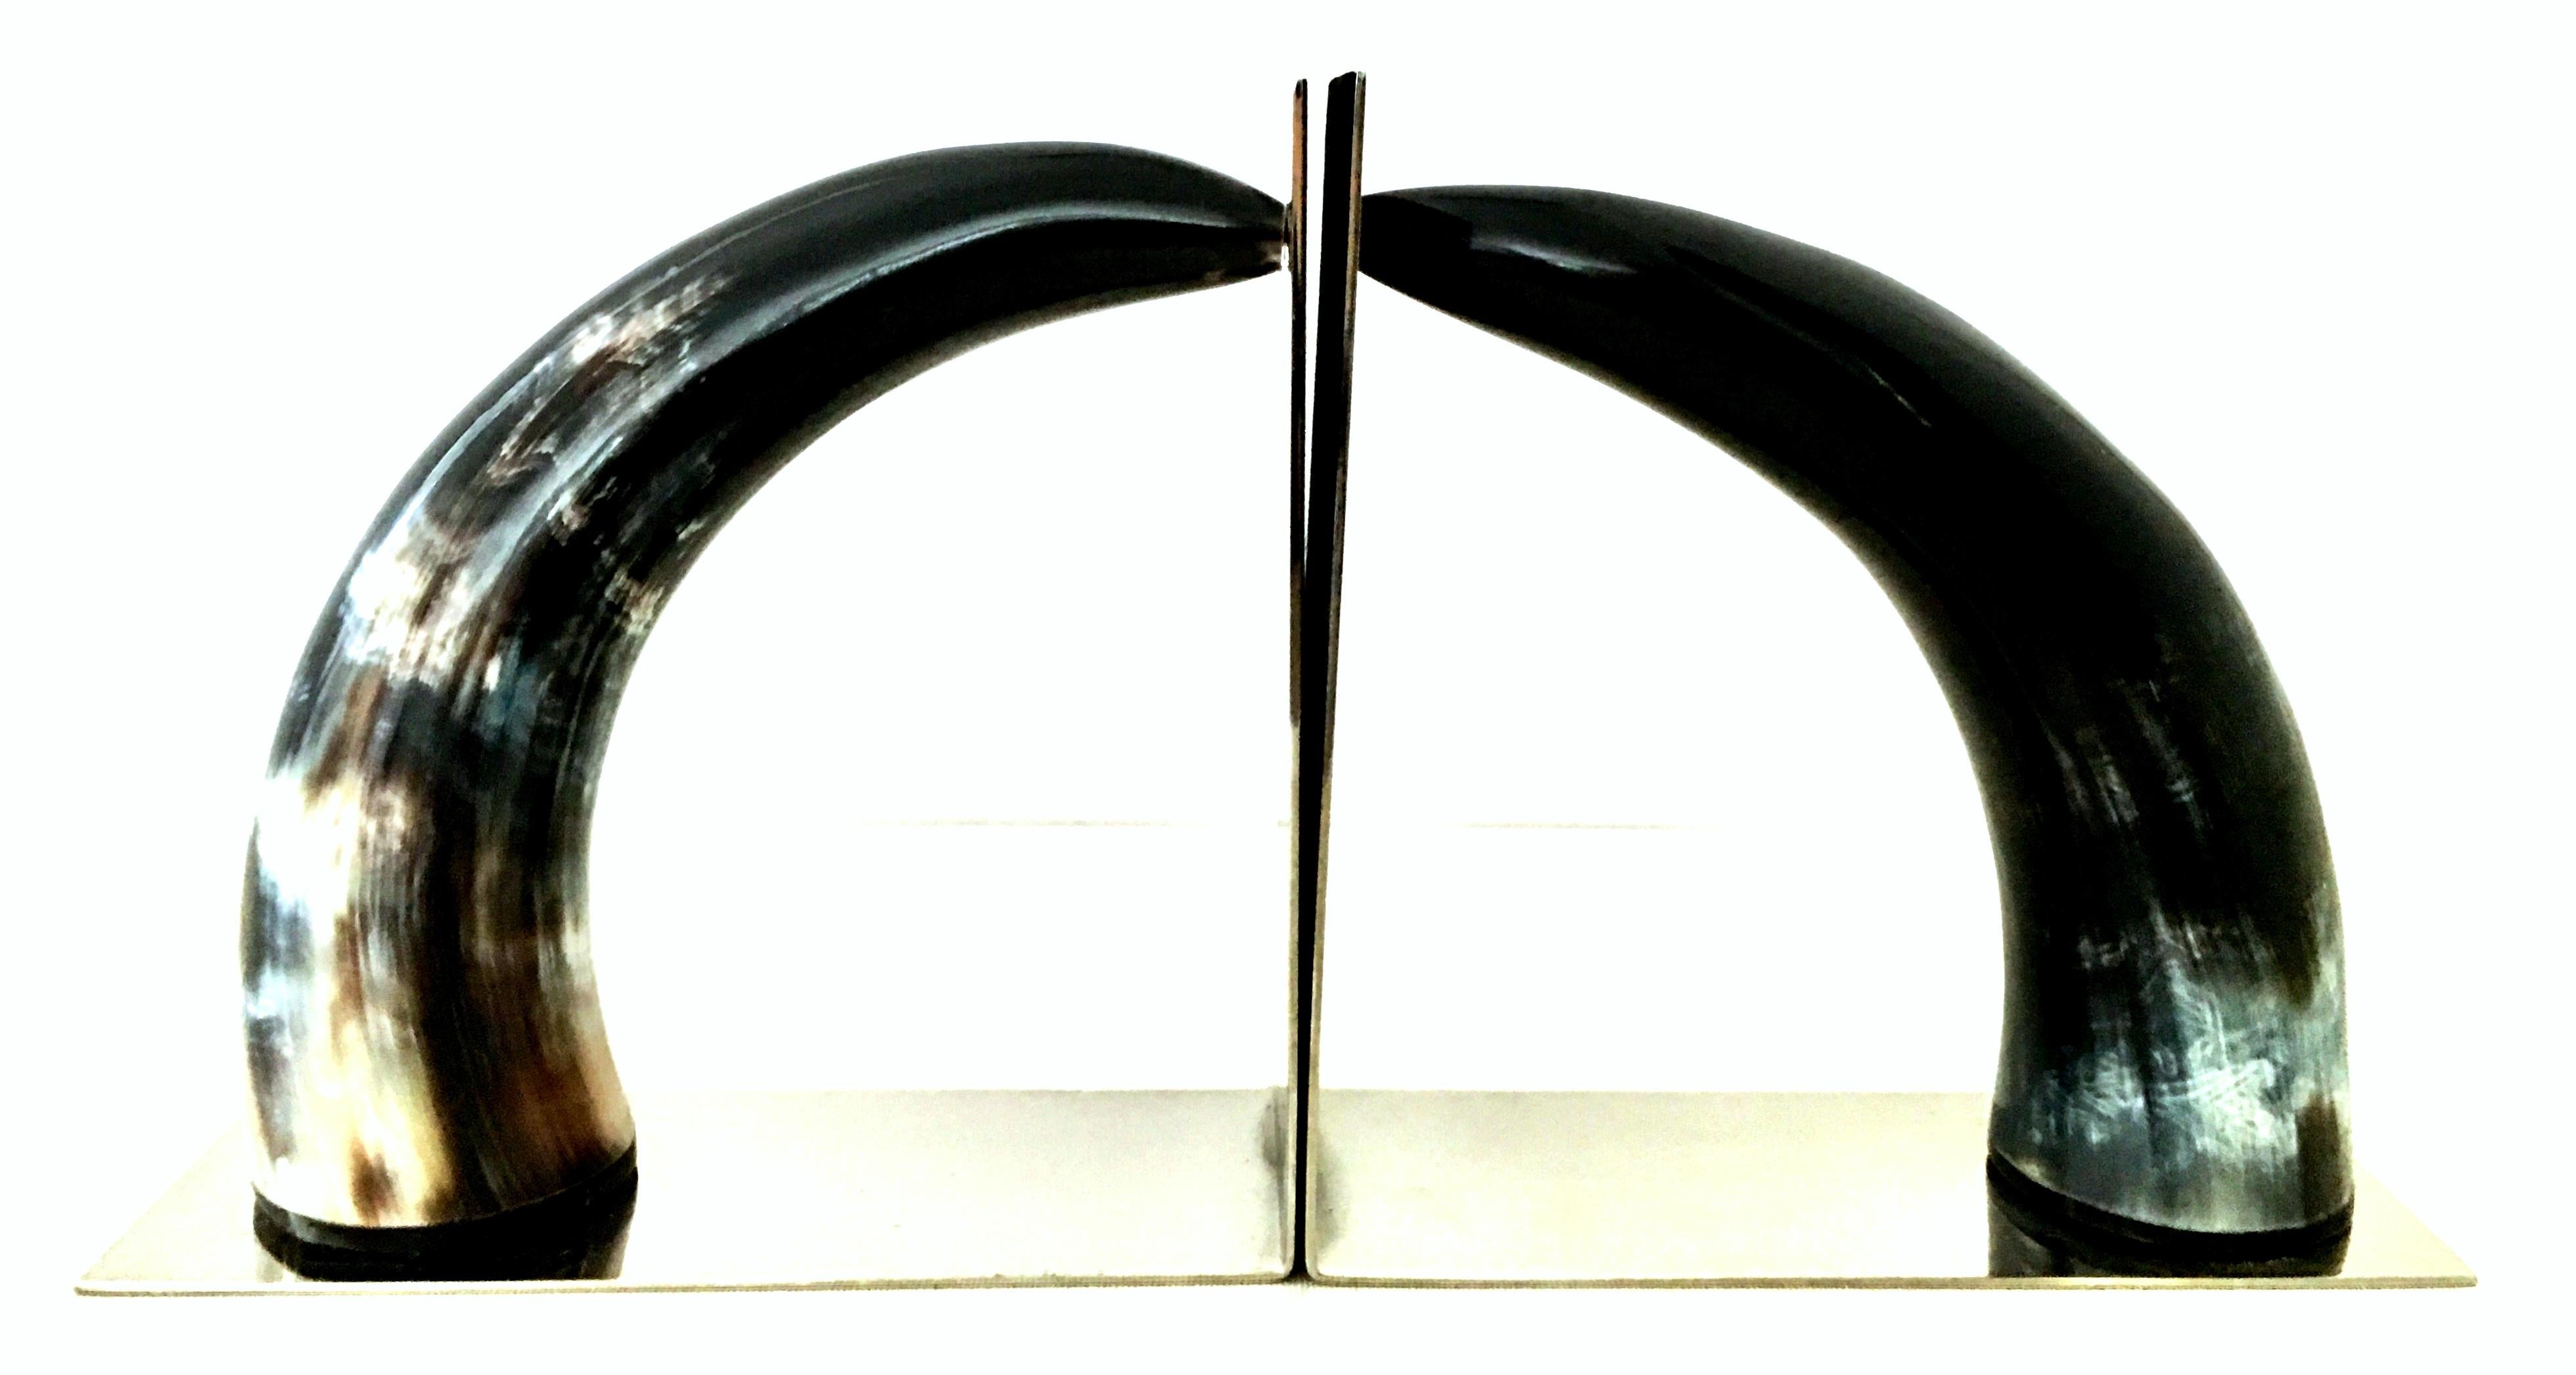 21st Century Contemporary Pair Of Chrome Mounted Horn Bookend Sculptures In Excellent Condition For Sale In West Palm Beach, FL